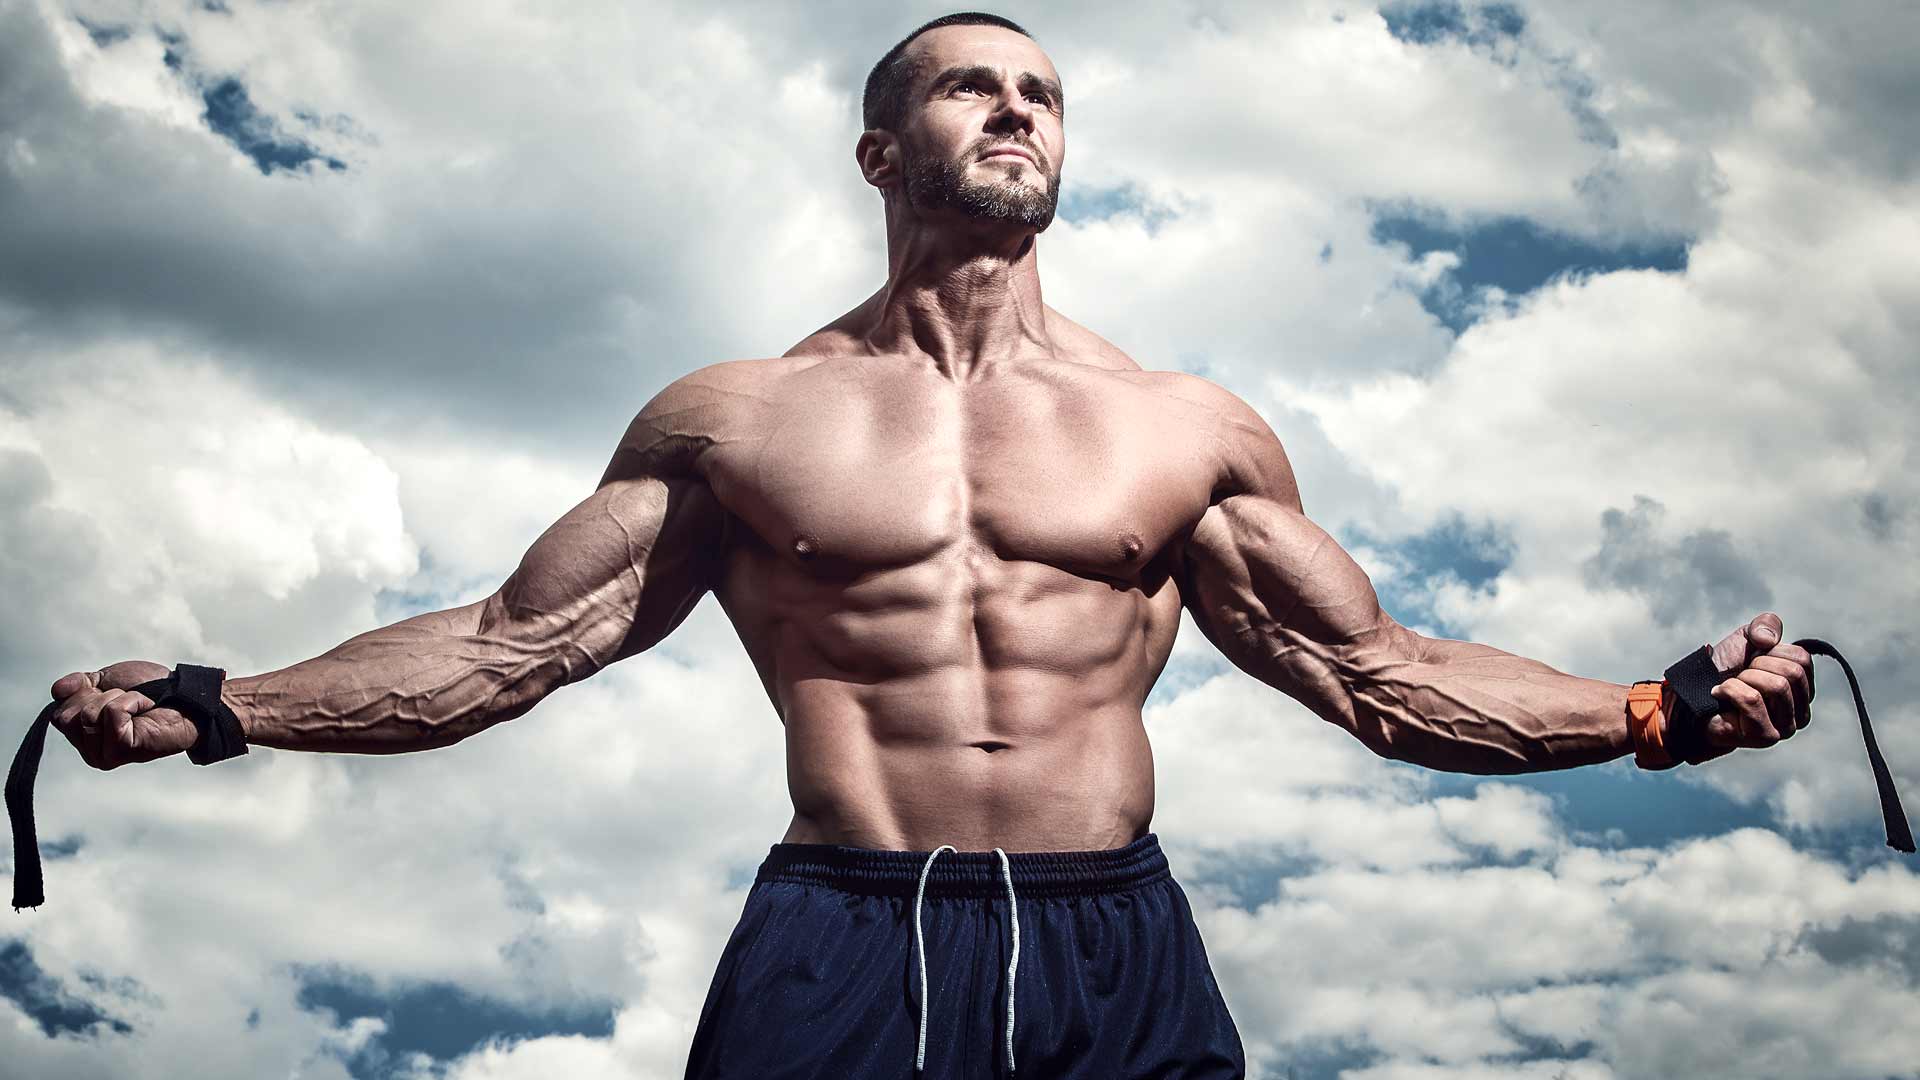 How To Get Abs? Then Don't Do This! Top 6 Killer Mistakes